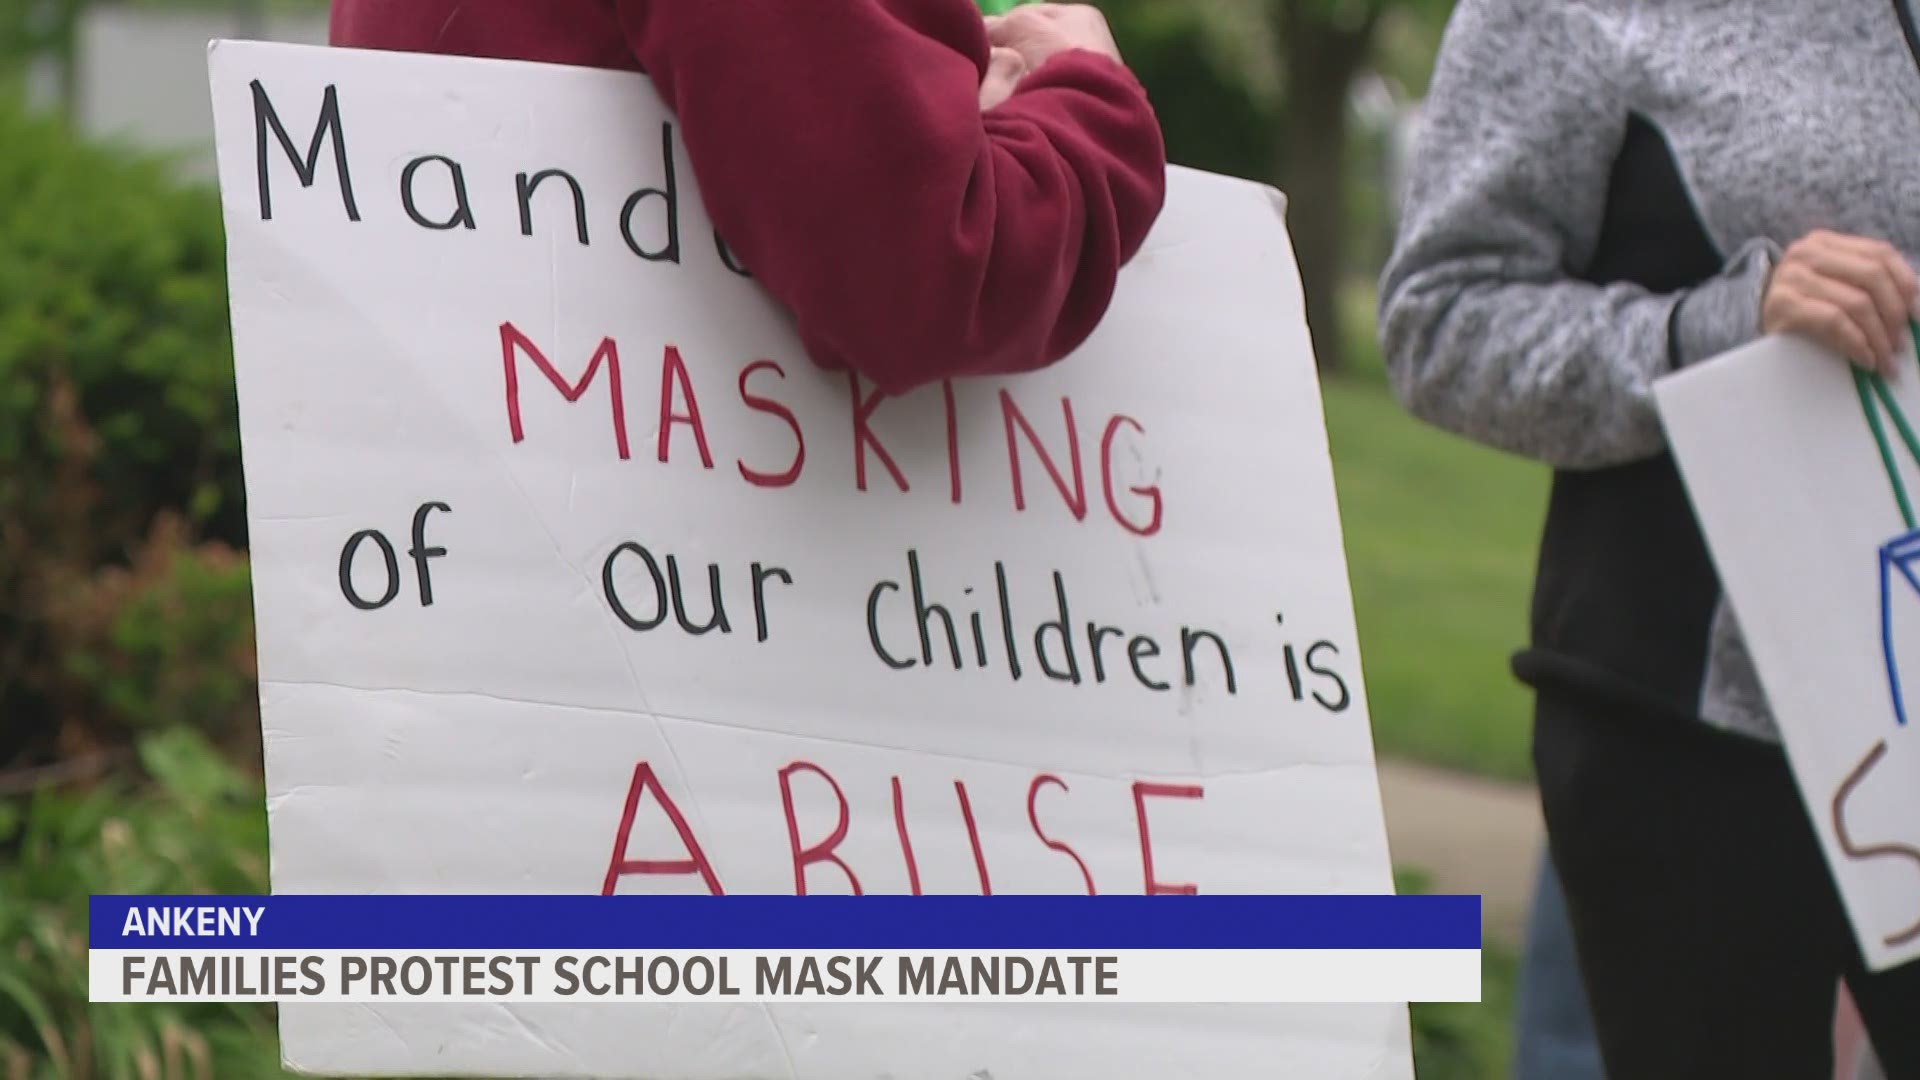 Monday, a little over 30 parents and children gathered to voice their concerns over wearing masks for the two weeks remaining in school.